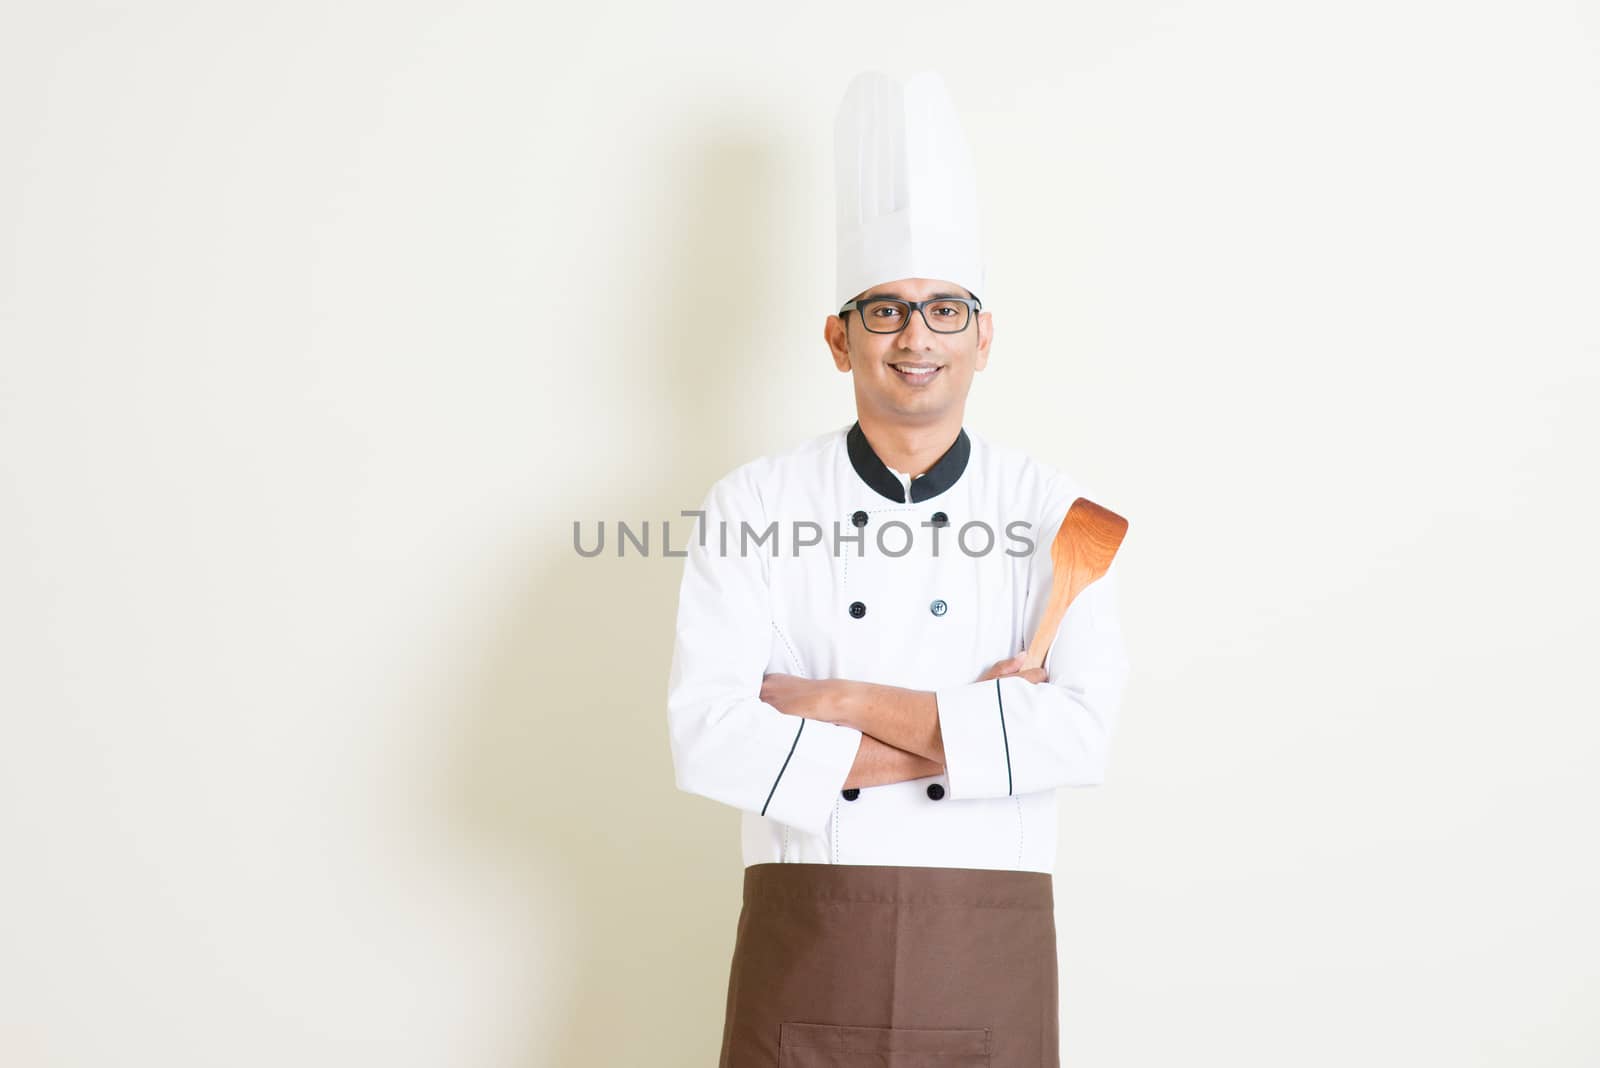 Portrait of handsome Indian male chef in uniform hand holding spatula and smiling, standing on plain background with shadow, copy space on side.